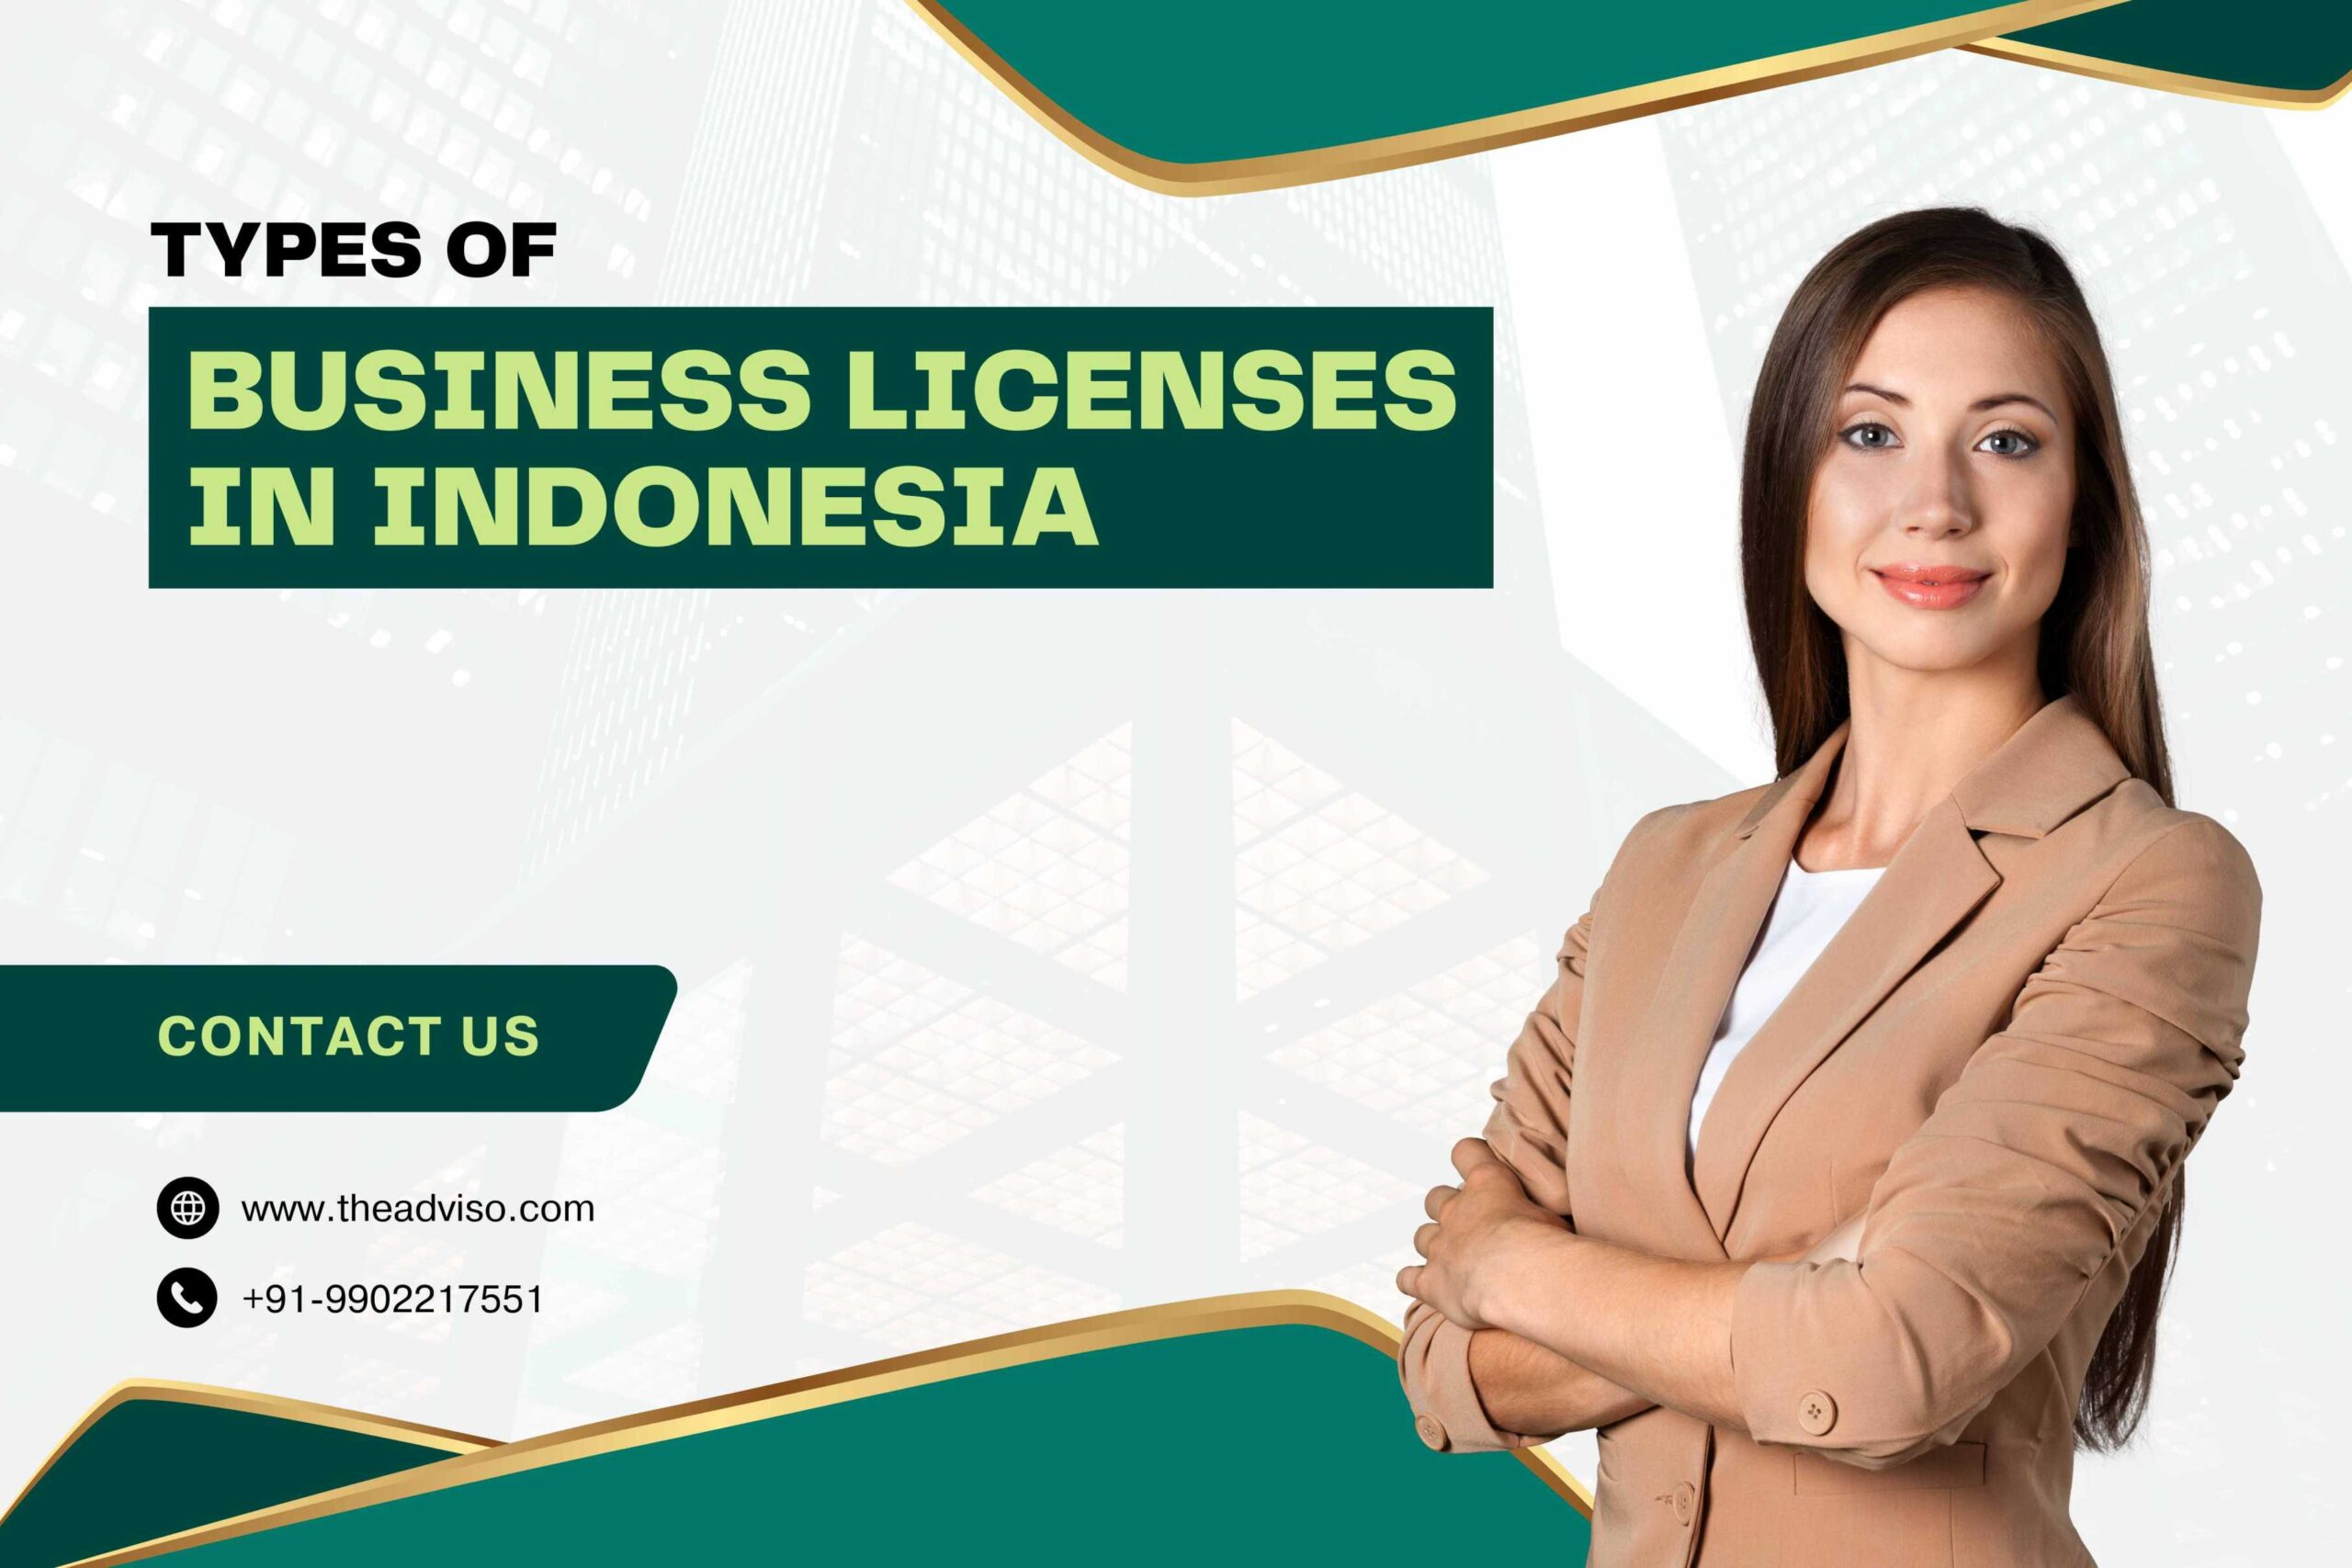 Types of Business Licenses in Indonesia